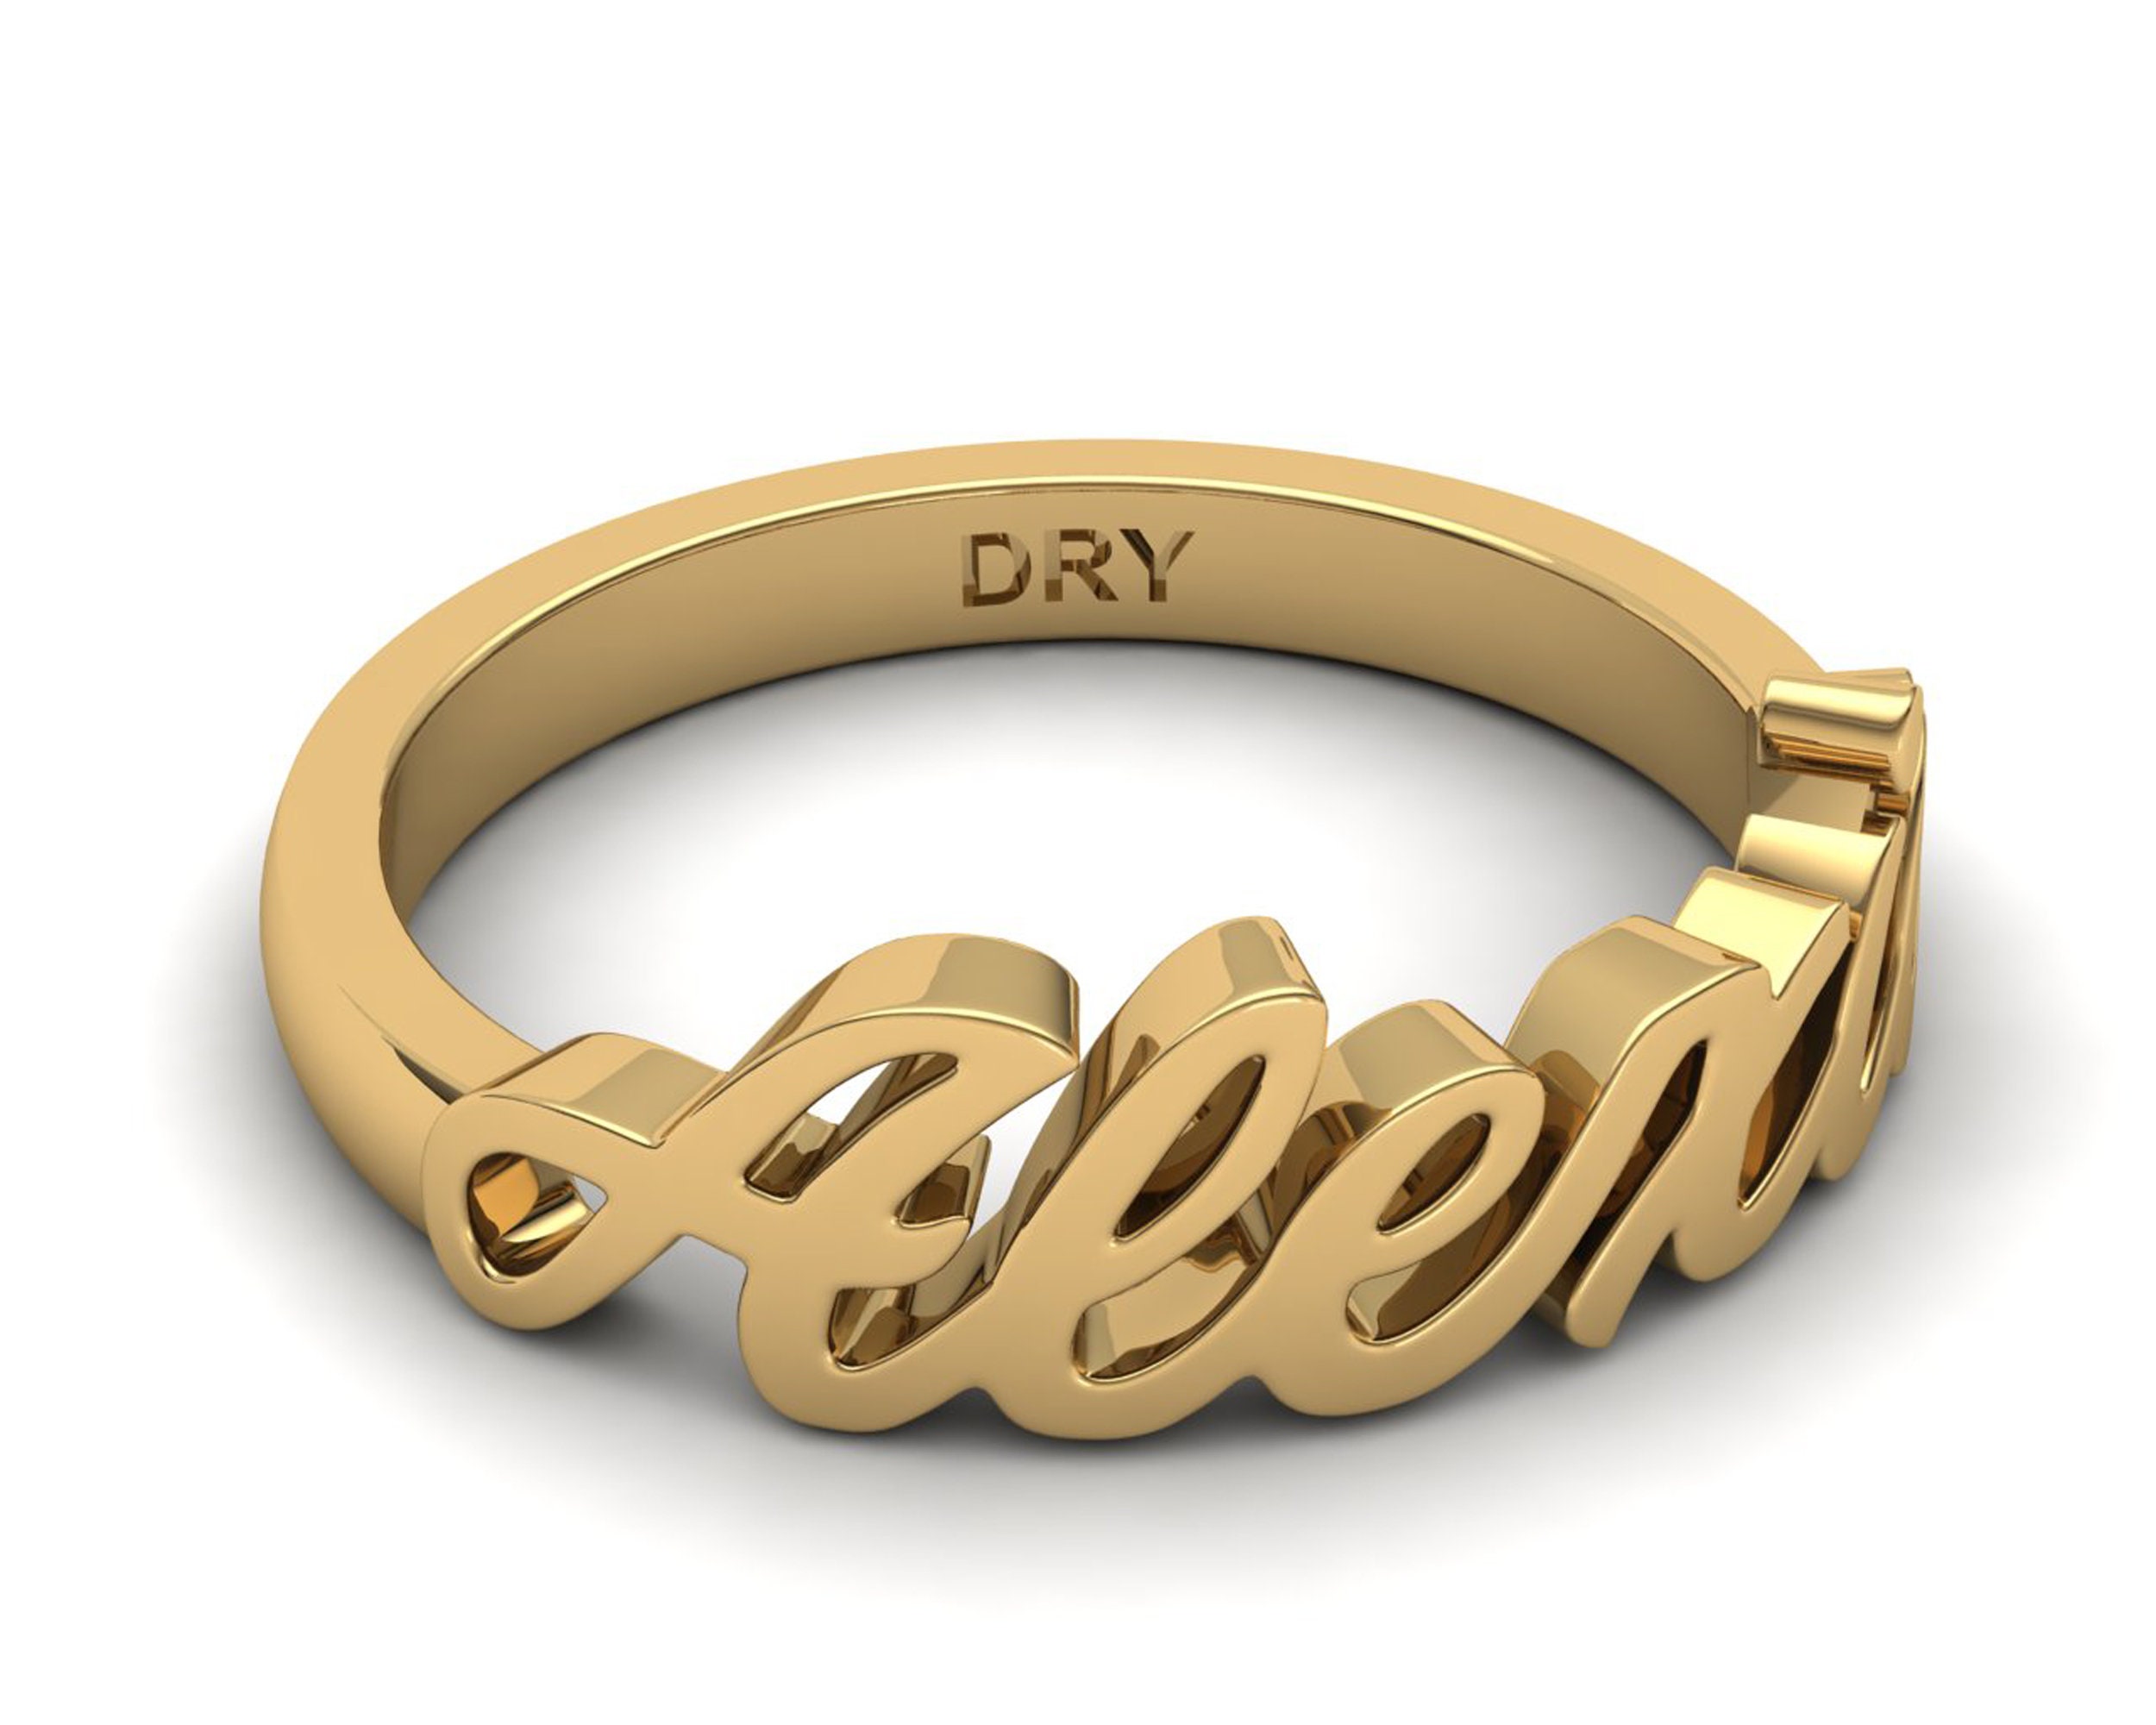 Personalized Name Ring in Script Design With Diamond Accent on Tail Beneath  Name - Walmart.com